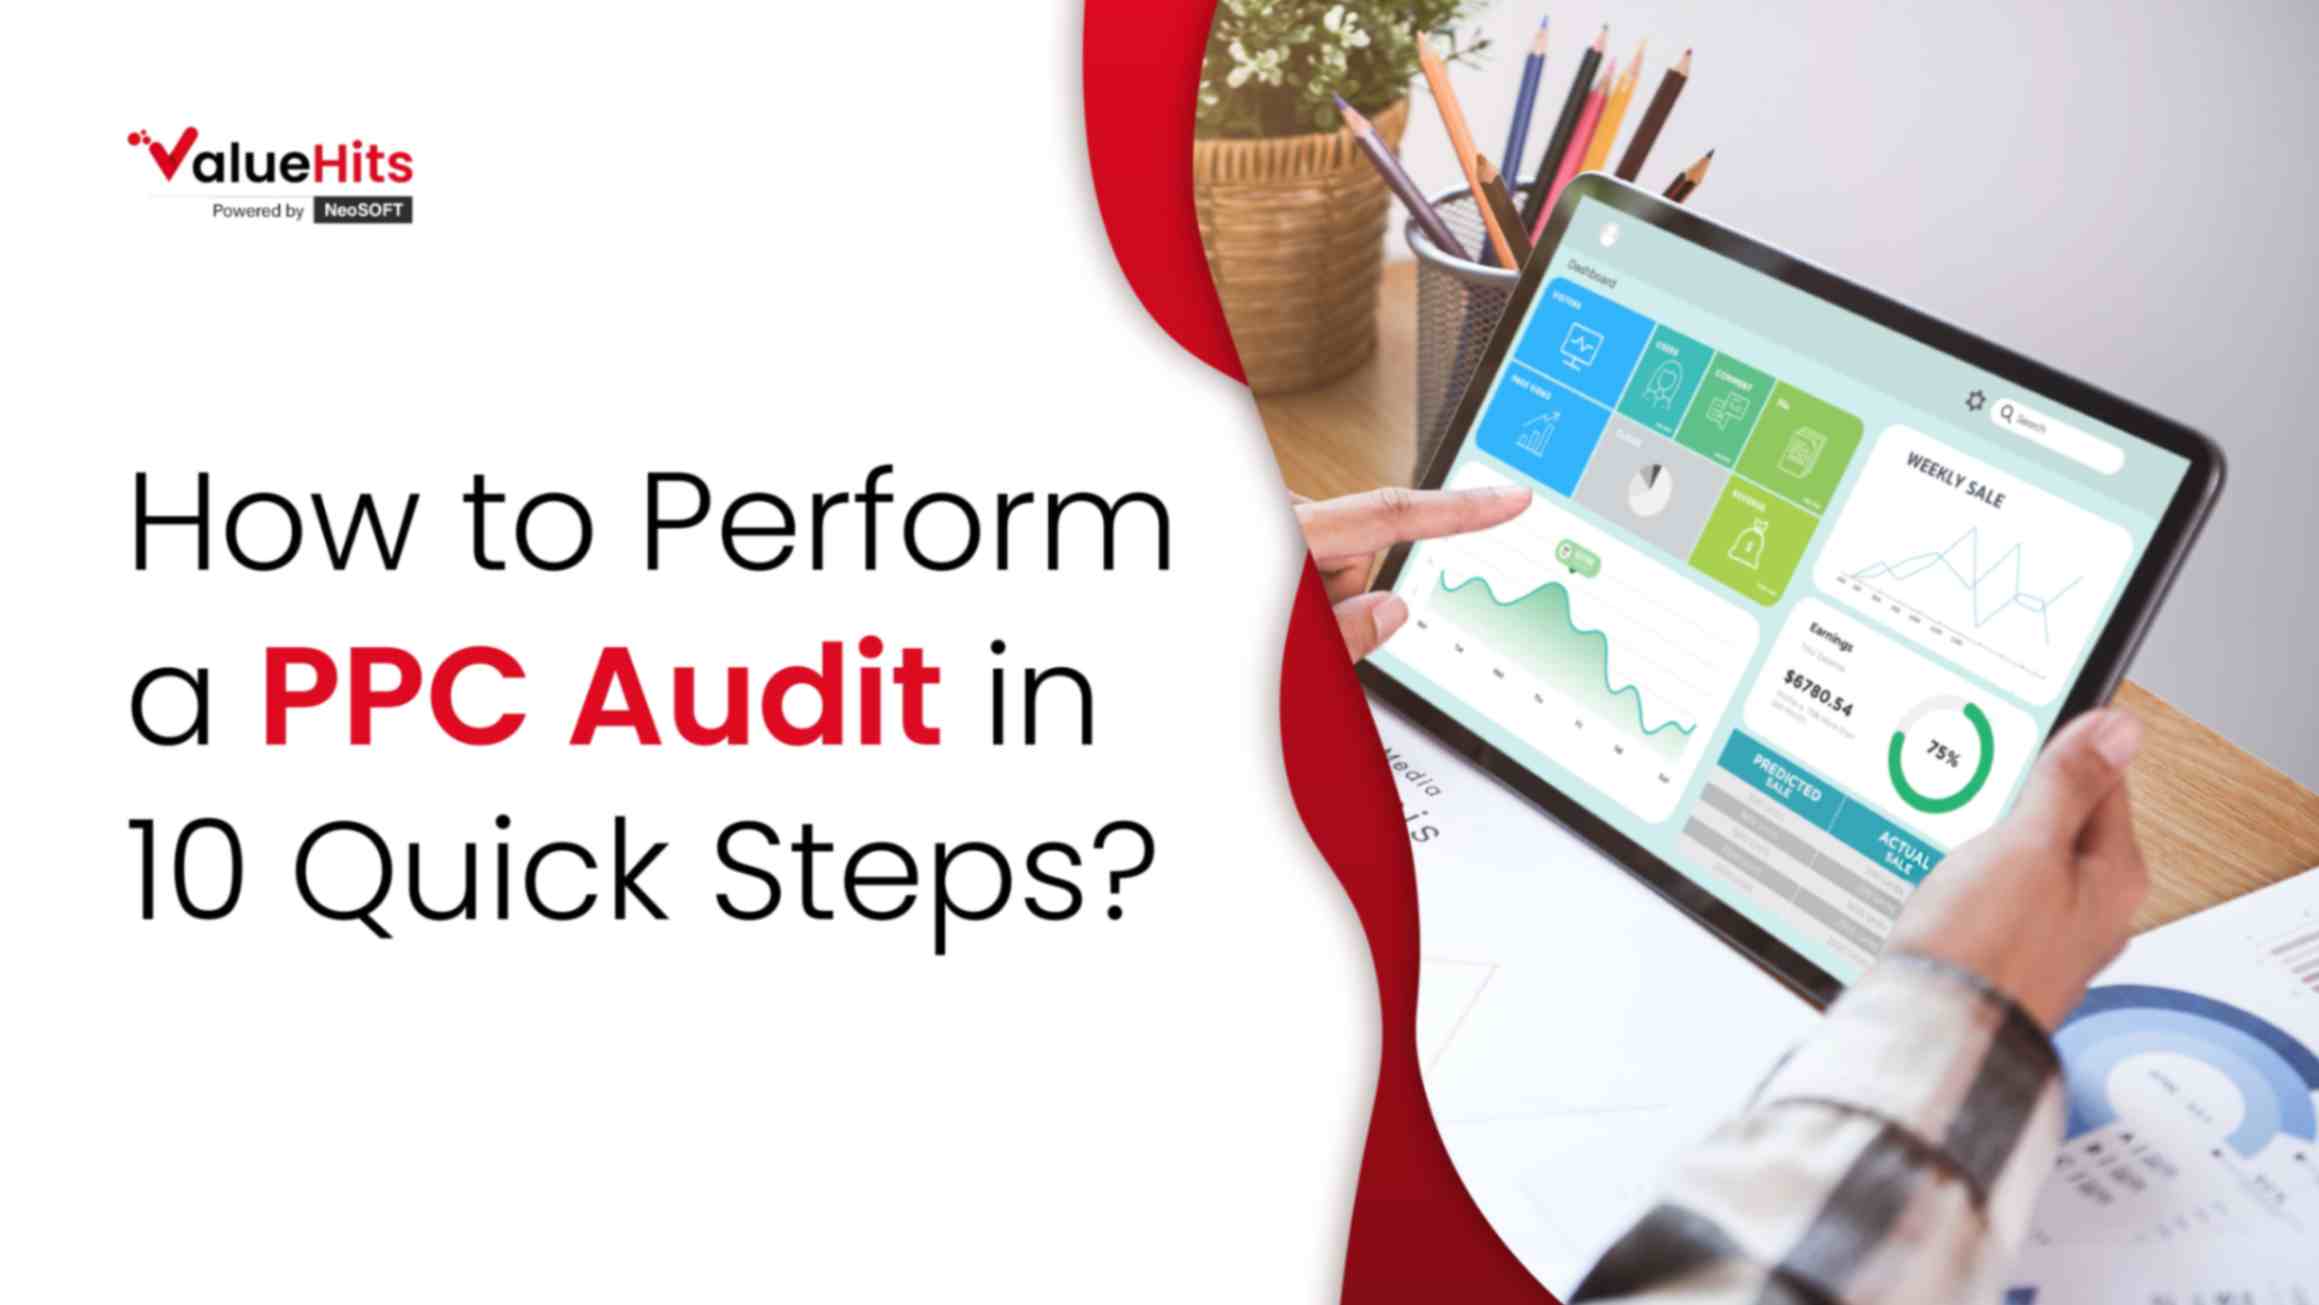 How to Perform a PPC Audit in 10 Quick Steps?